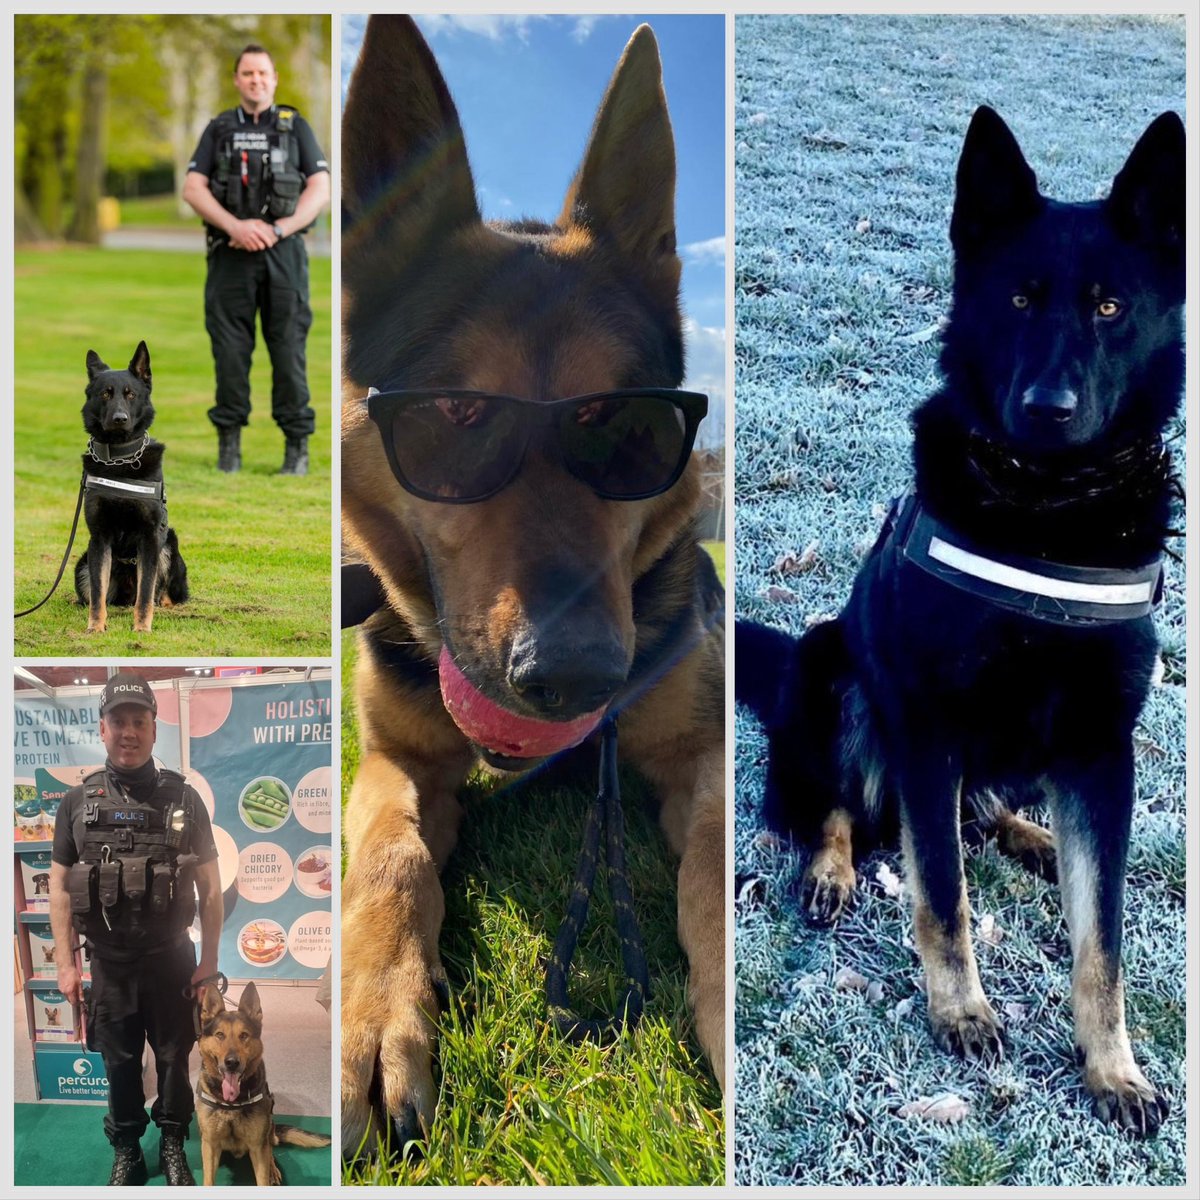 PD Gunner & PD Hans, two of our amazing police dogs will be retiring but not before they make a final appearance @Crufts If you’re heading to #Crufts and see them this weekend, say hello 🐾🐾